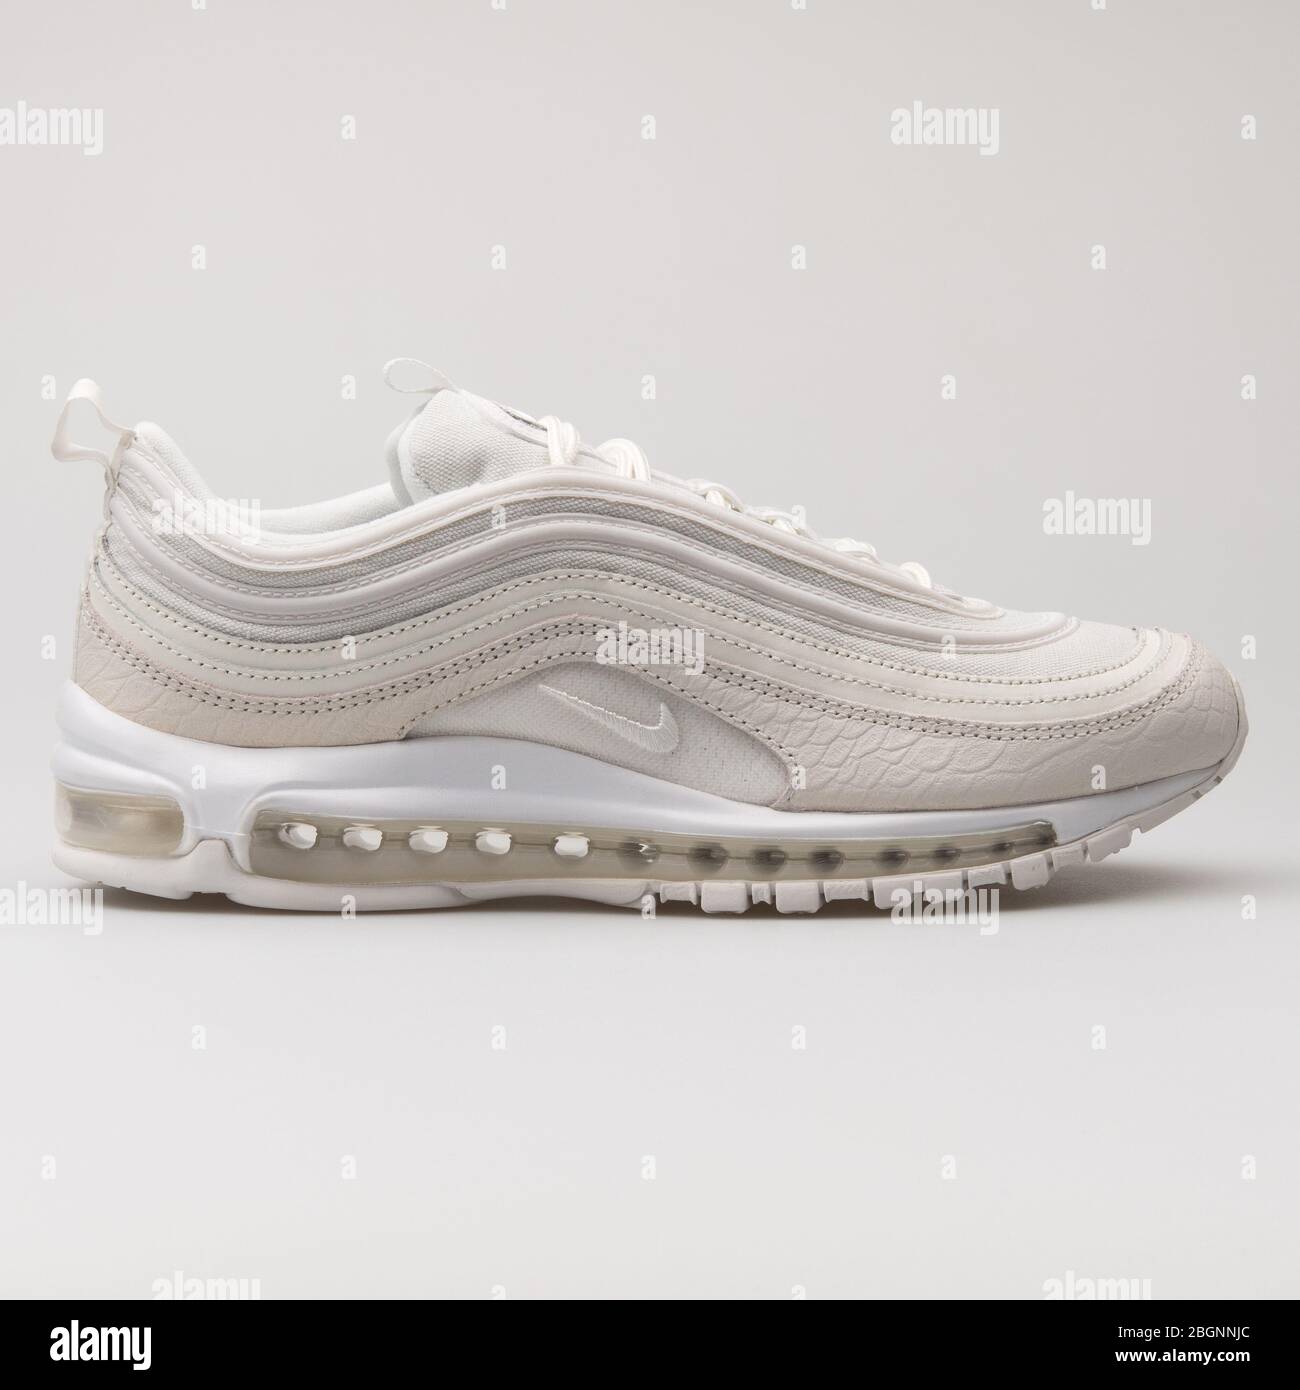 Air Max 97 High Resolution Stock Photography and Images - Alamy